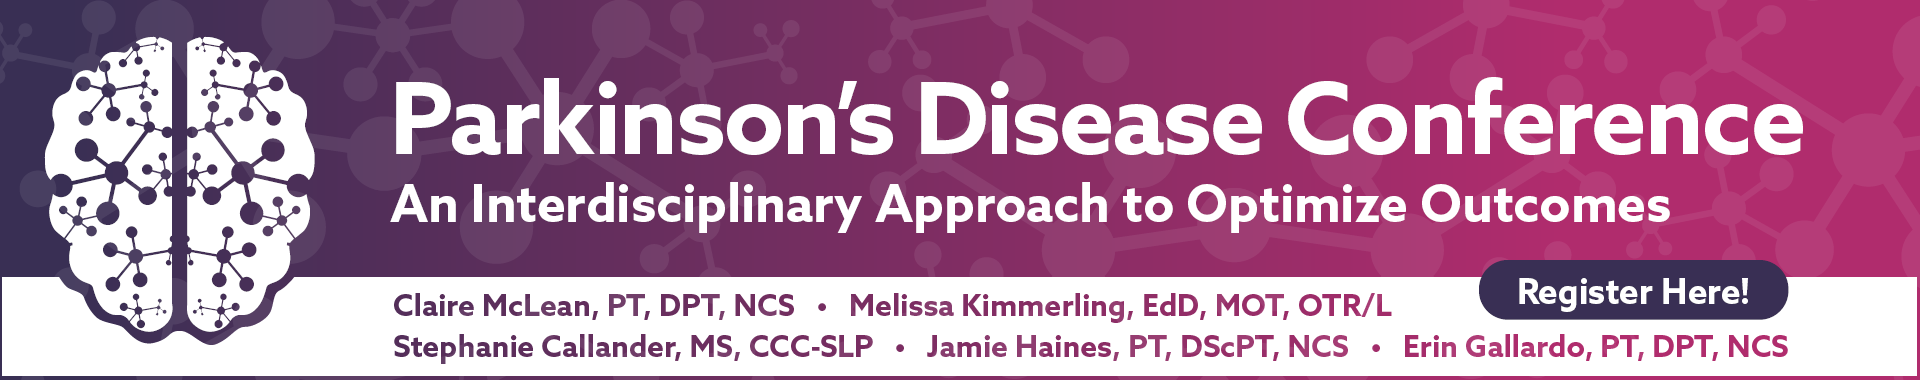 Parkinson's Disease Conference: An Interdisciplinary Approach to Optimize Outcomes